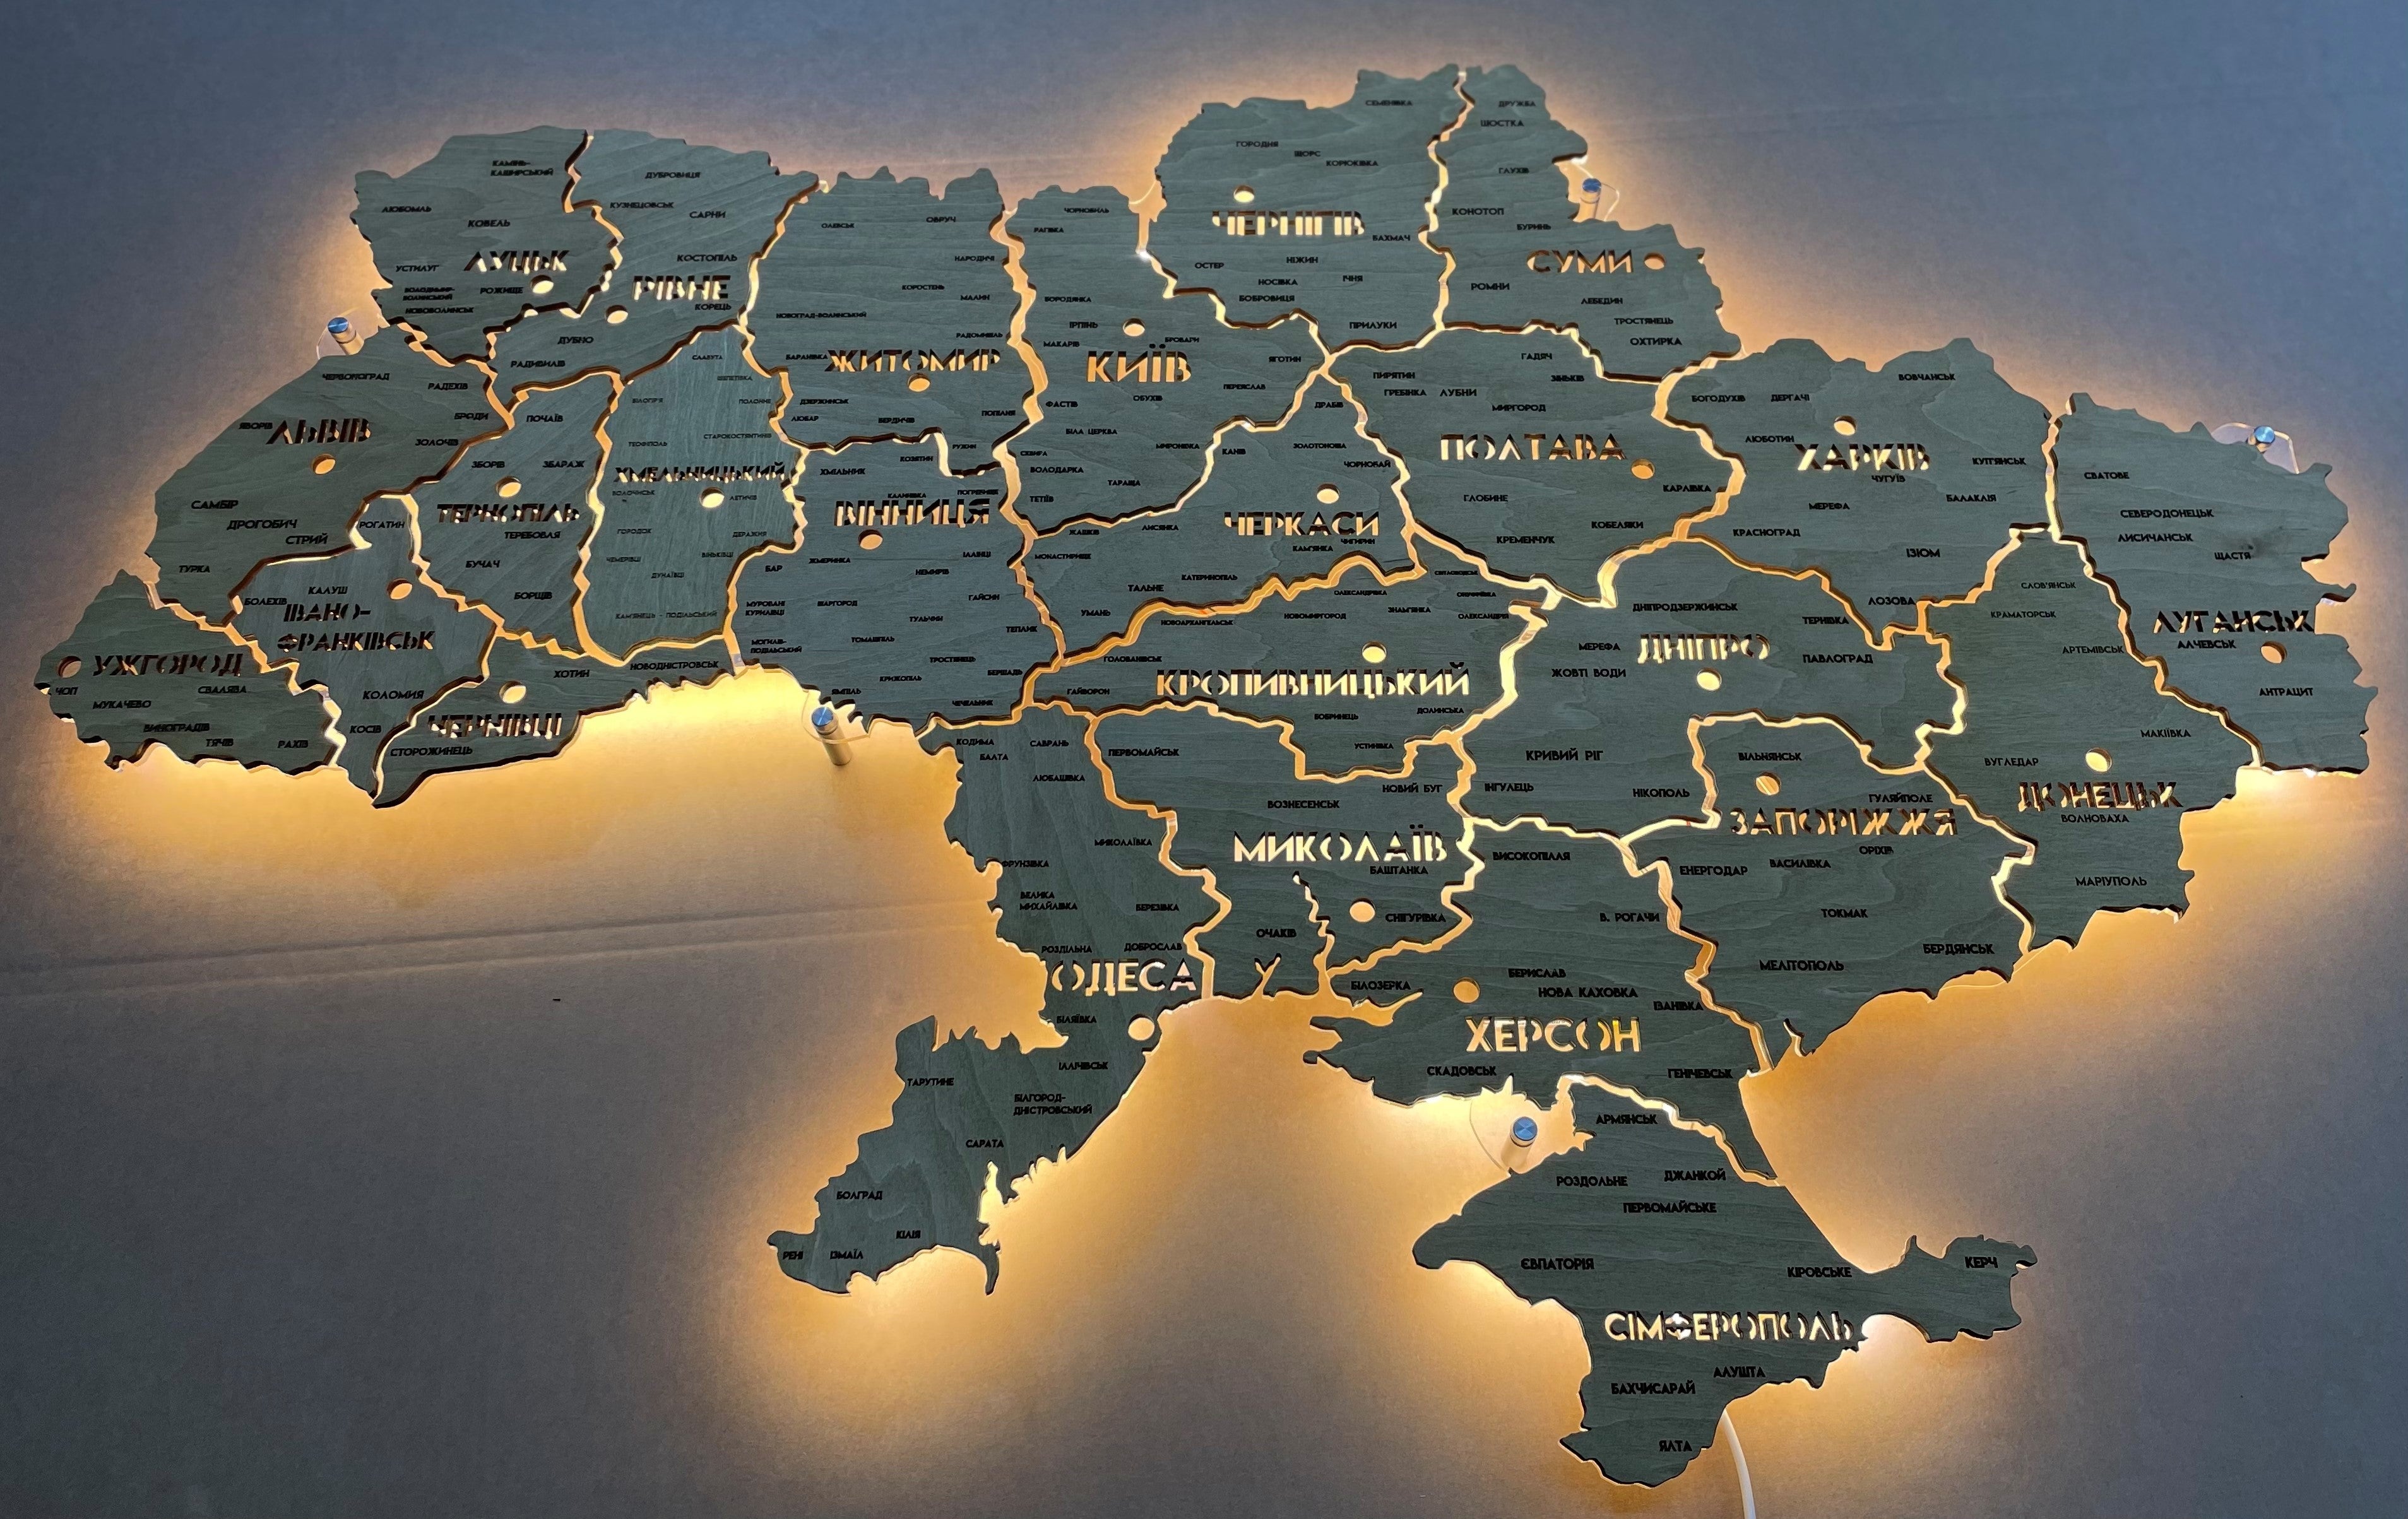 detailed-ukraine-led-map-on-acrylic-glass-with-backlighting-between-regions-color-oak